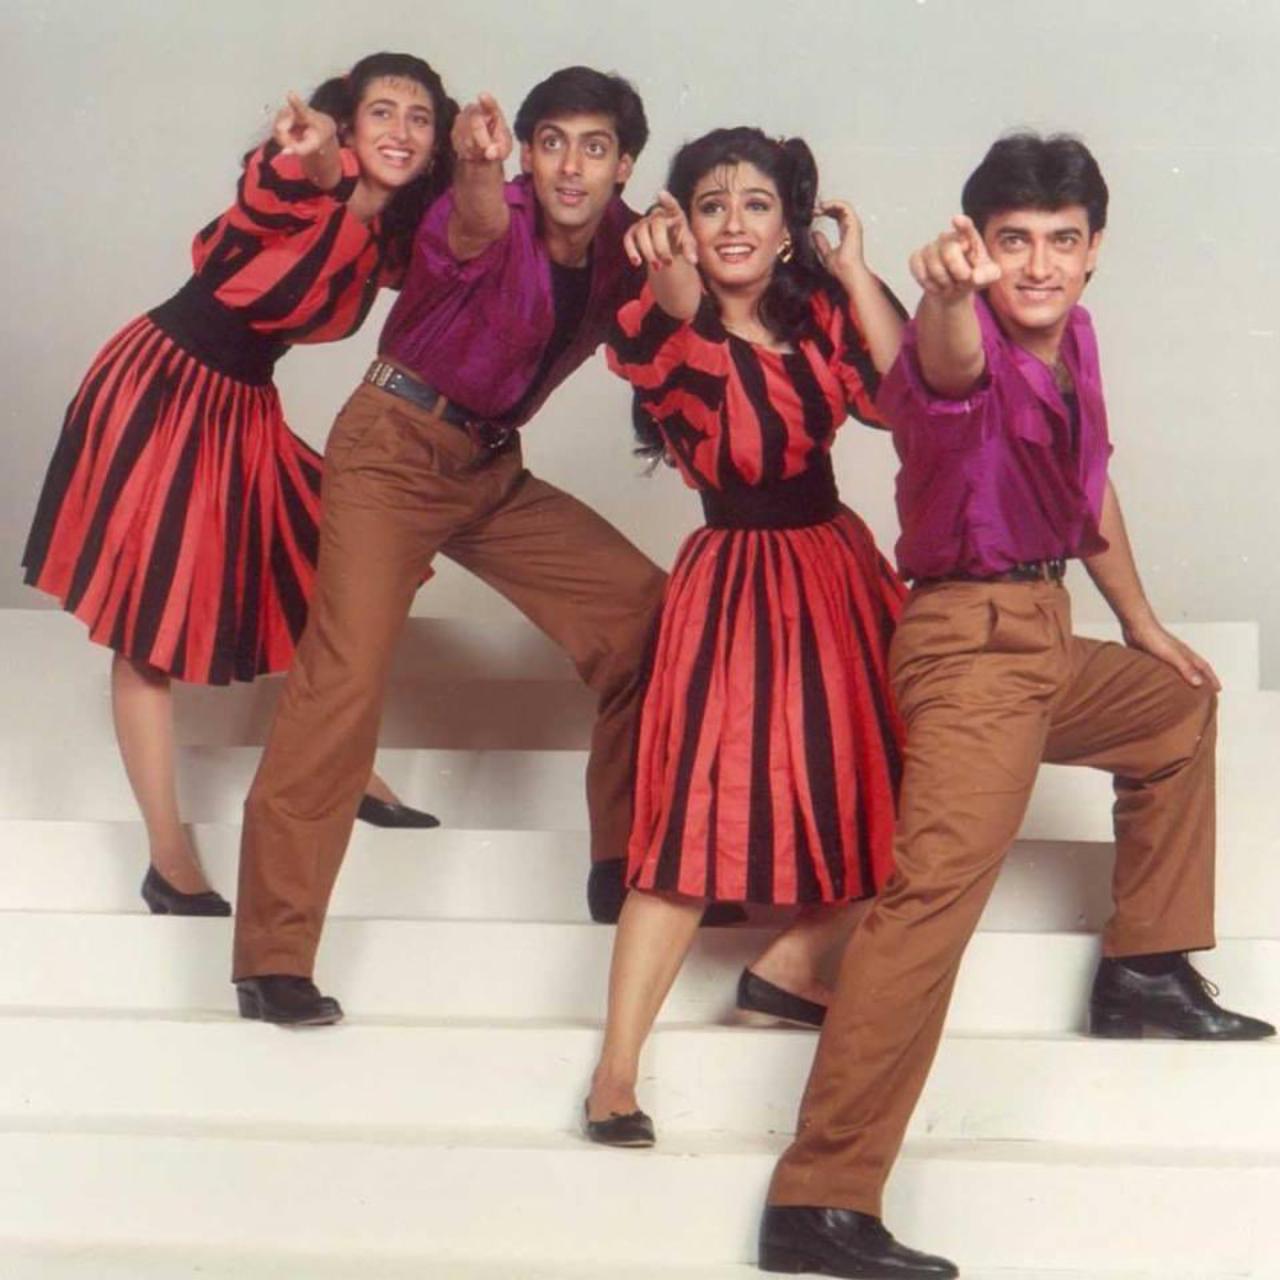 'Andaz Apna Apna' does not fail to make you laugh even when you watch the film 28 years after its release. The film directed by Rajkumar Santoshi starred Aamir Khan, Salman Khan, Raveena Tandon, and Karisma Kapoor in lead roles. The film also starred Paresh Rawal and Shakti Kapoor in pivotal roles.